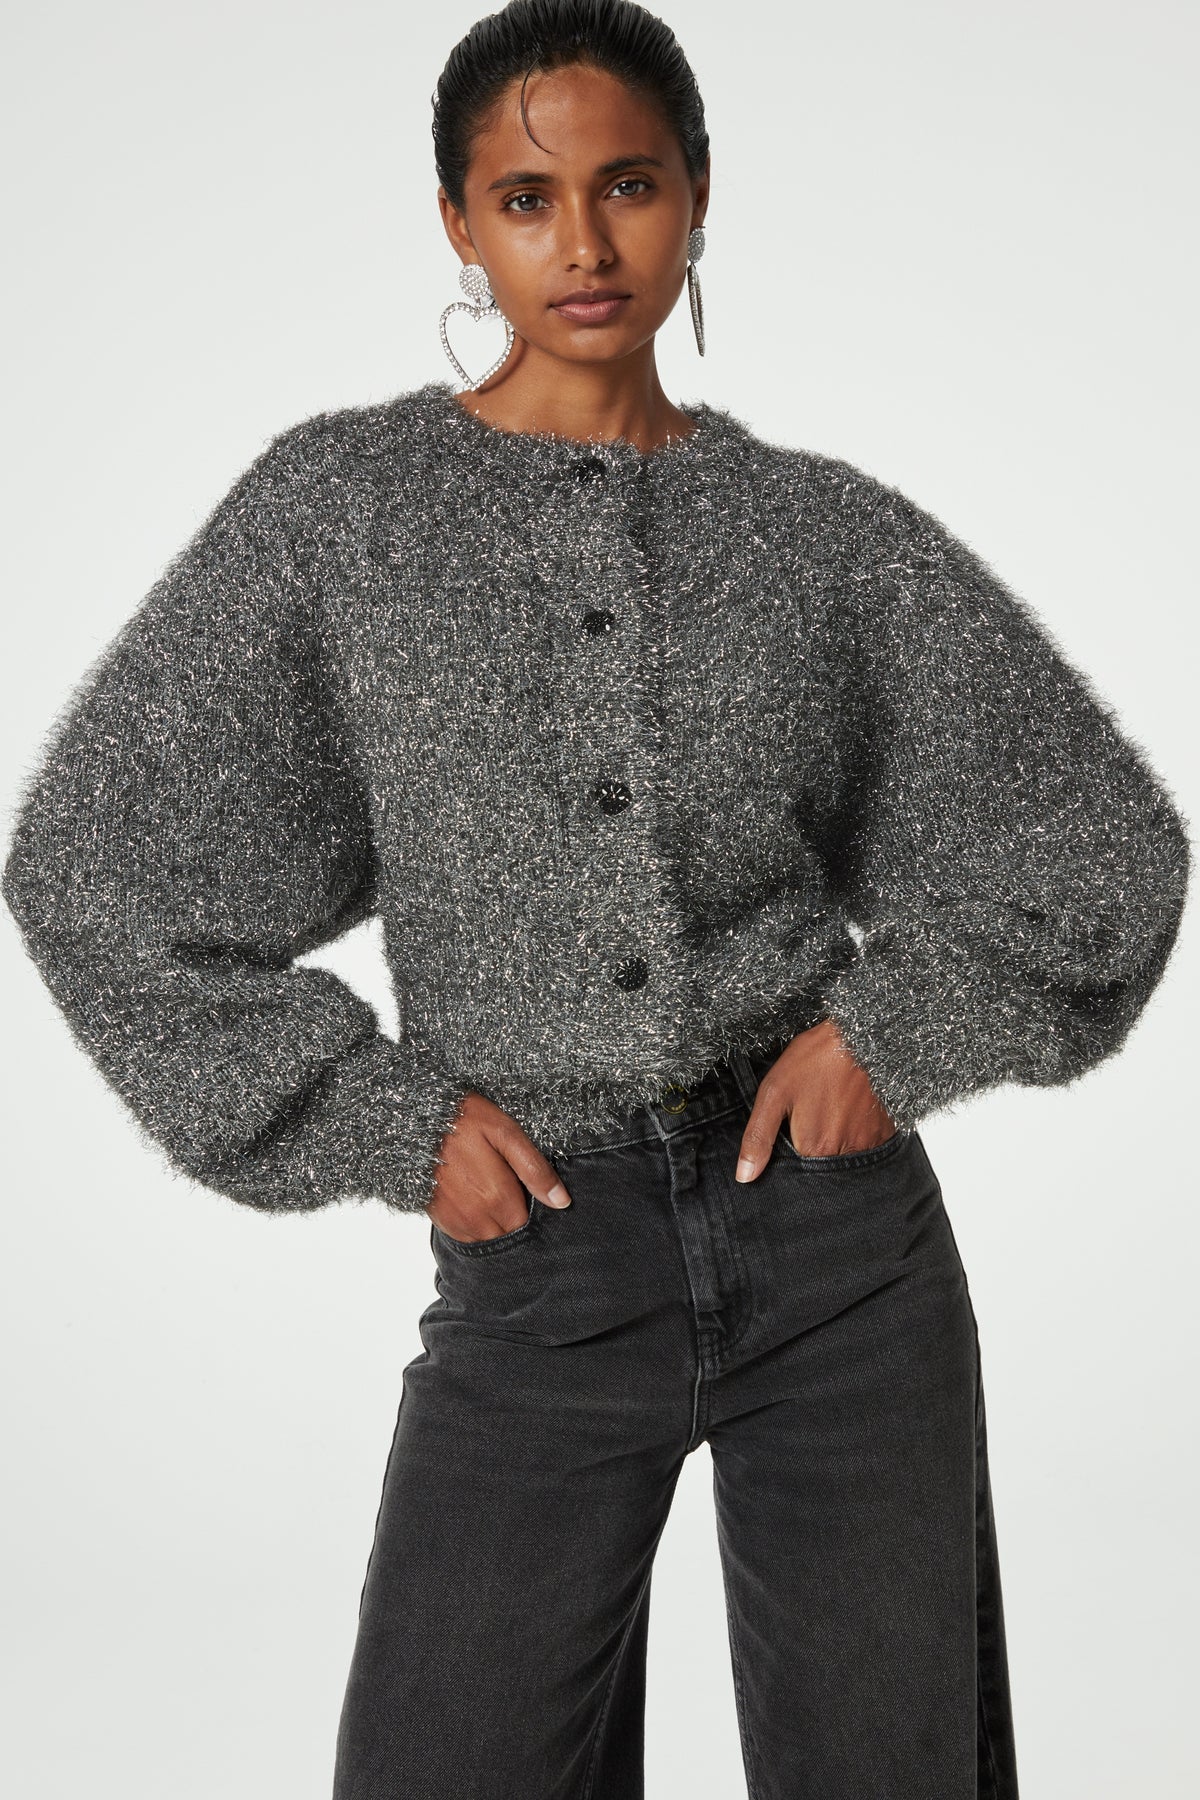 Silver tinsel effect knitted cardigan with wide sleeves crew neck and black button fastening